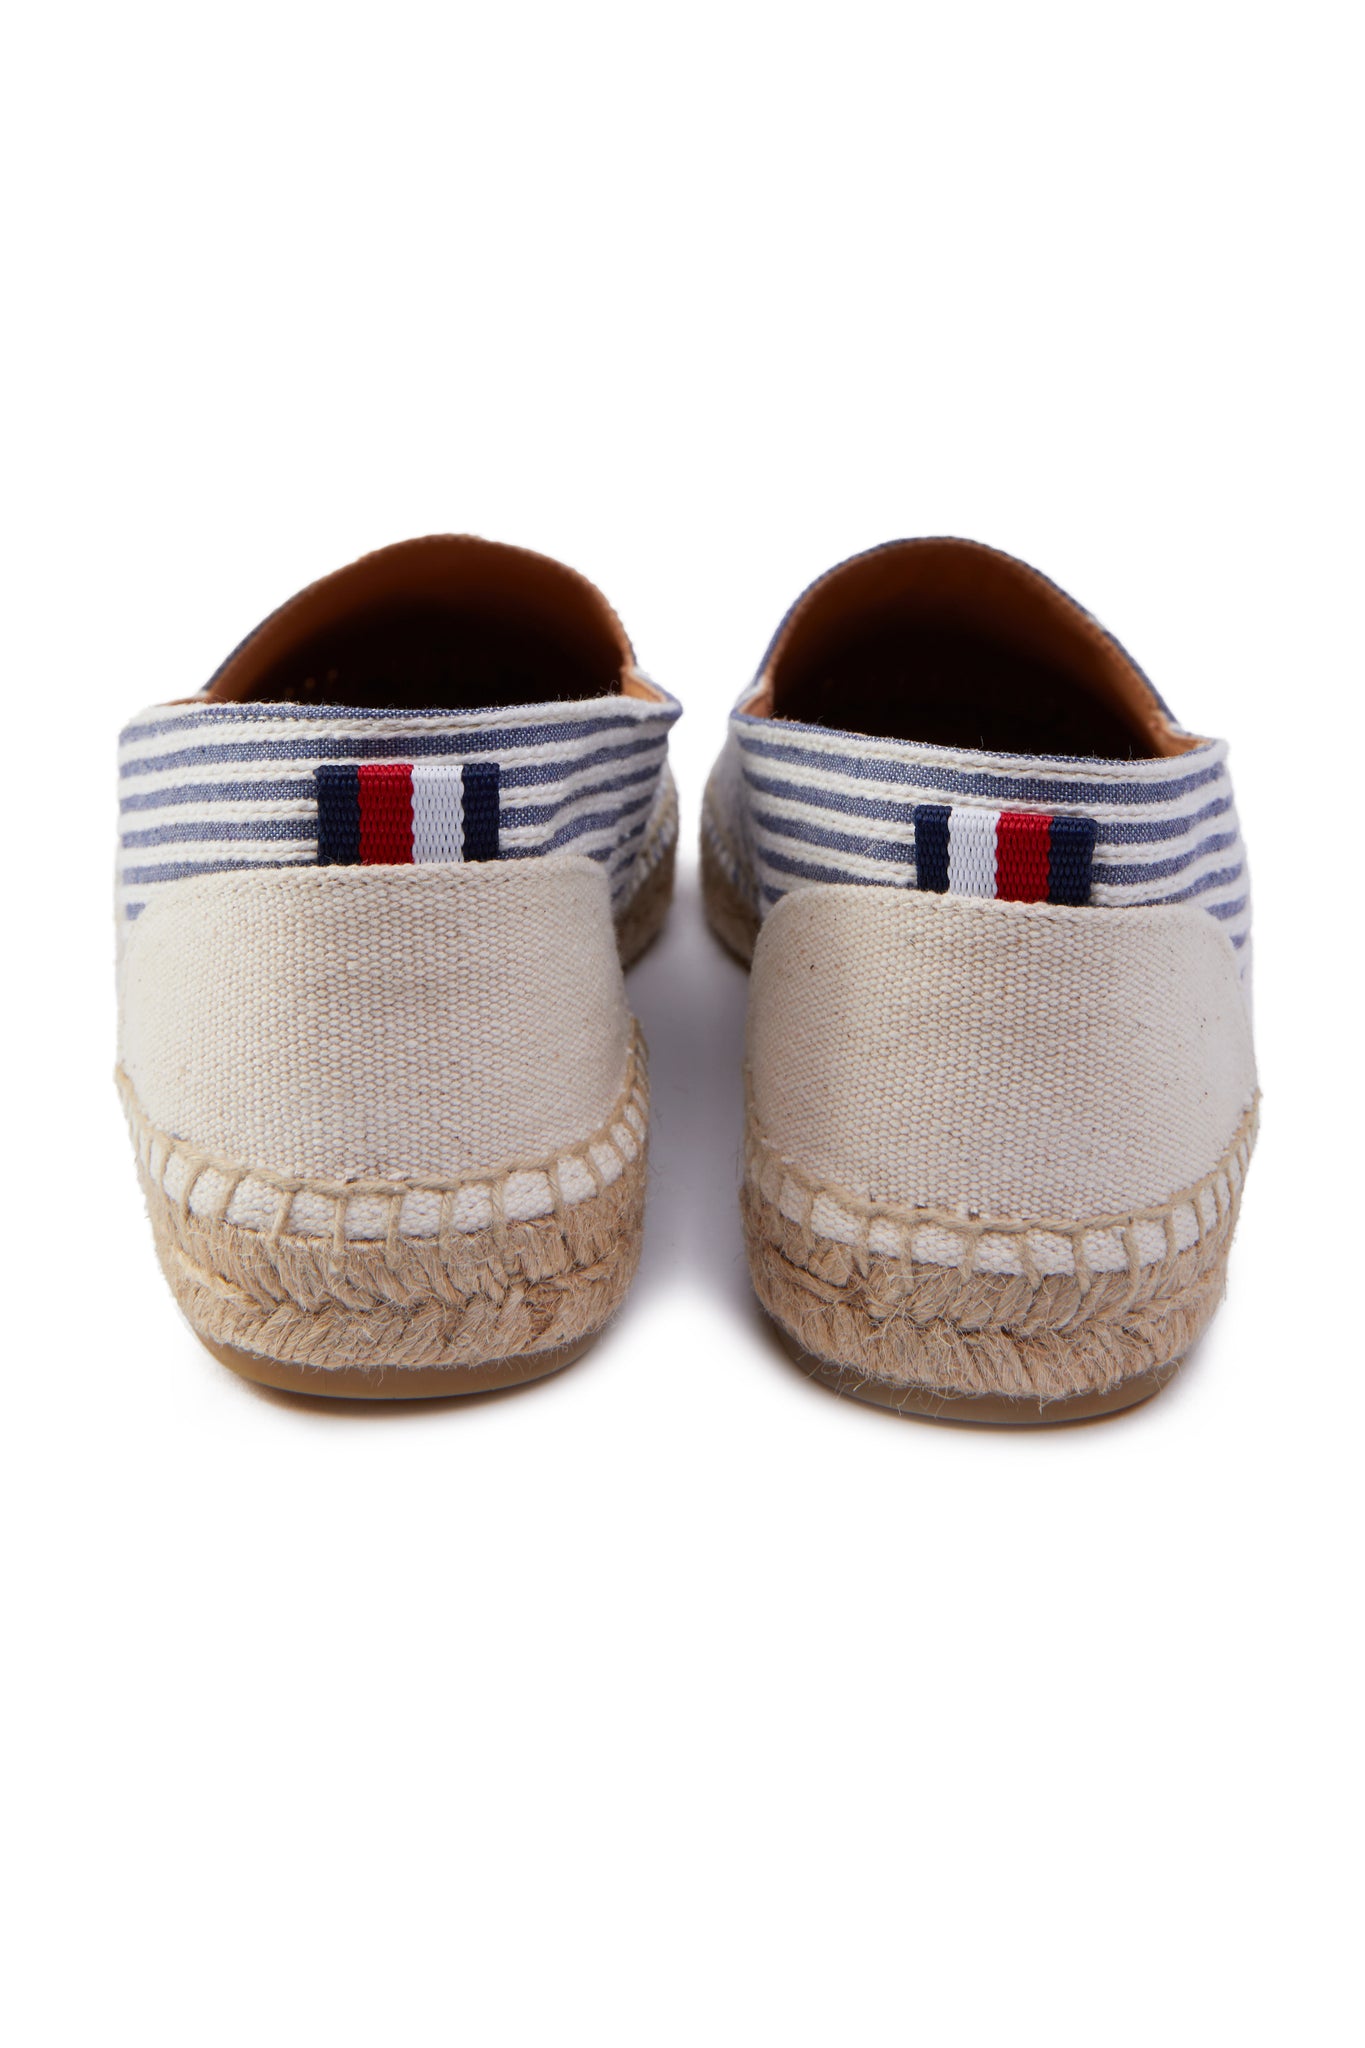 Back of classic style white and blue striped canvas espadrille with plaited jute sole and jute toe cap with red, white and blue small tag to the heel